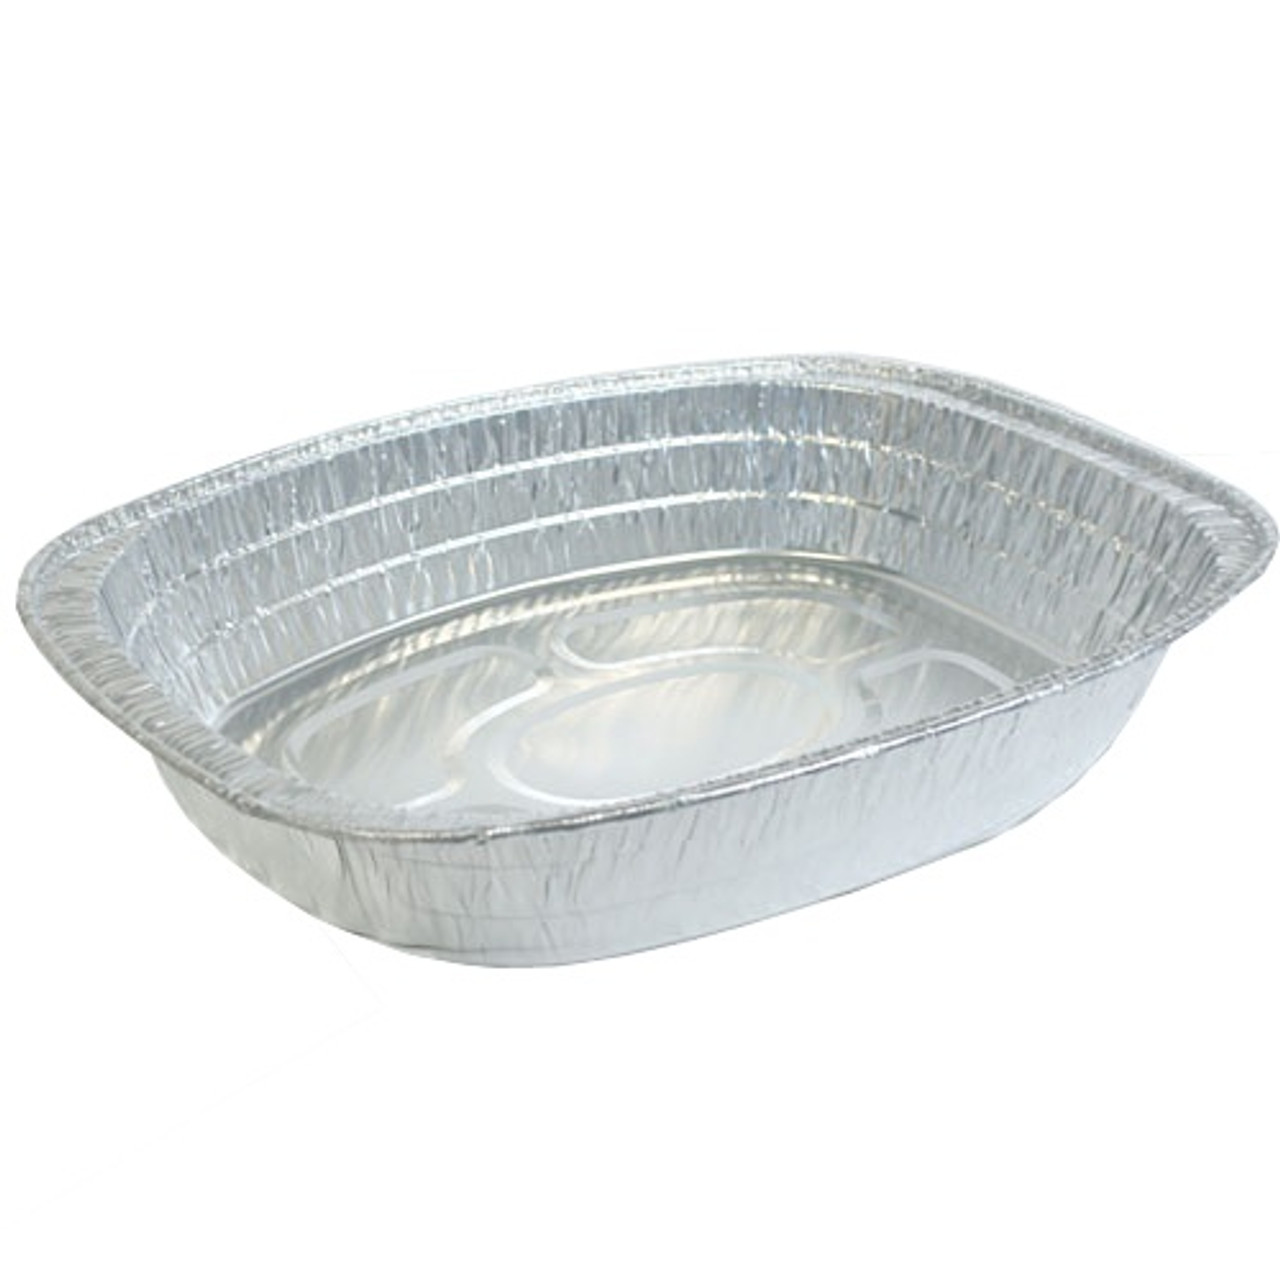 https://cdn11.bigcommerce.com/s-hgqmwywp99/images/stencil/1280x1280/products/50643/45429/large-oval-oven-aluminum-disposable-pan-rack-roaster-3__09817.1675880403.jpg?c=1?imbypass=on